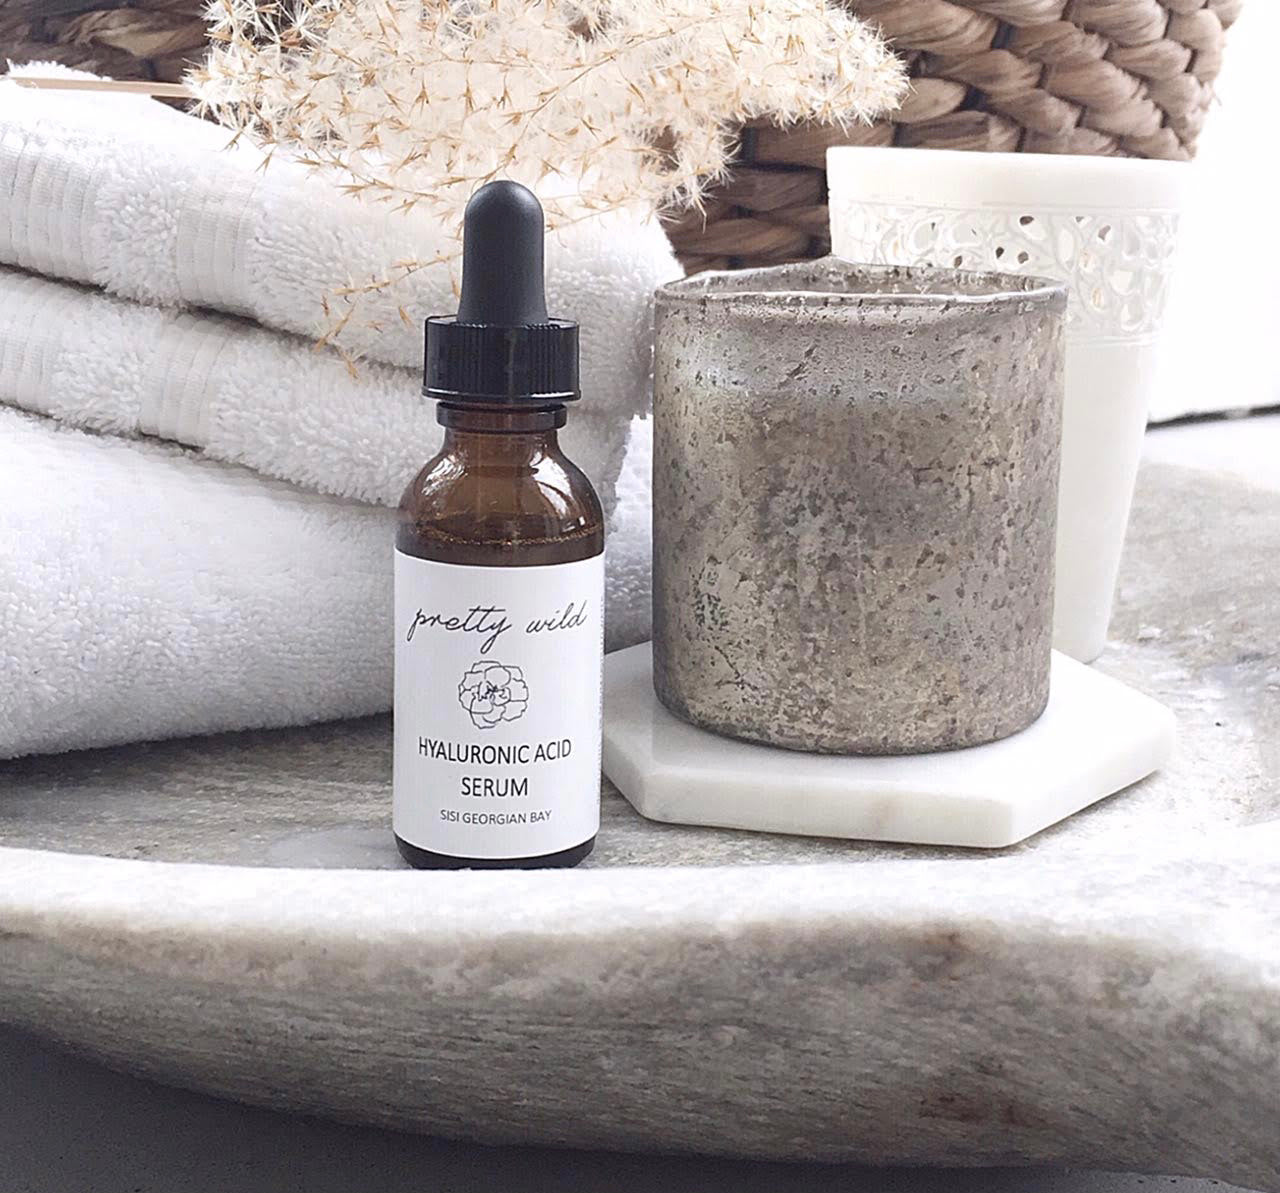 natural skincare products - a photo of the pretty wild hyaluronic acid serum in a 30ml amber glass bottle in front of a beautiful stone tray with fluffly white towels and a wicker basket behind it and a pottery cup beside it